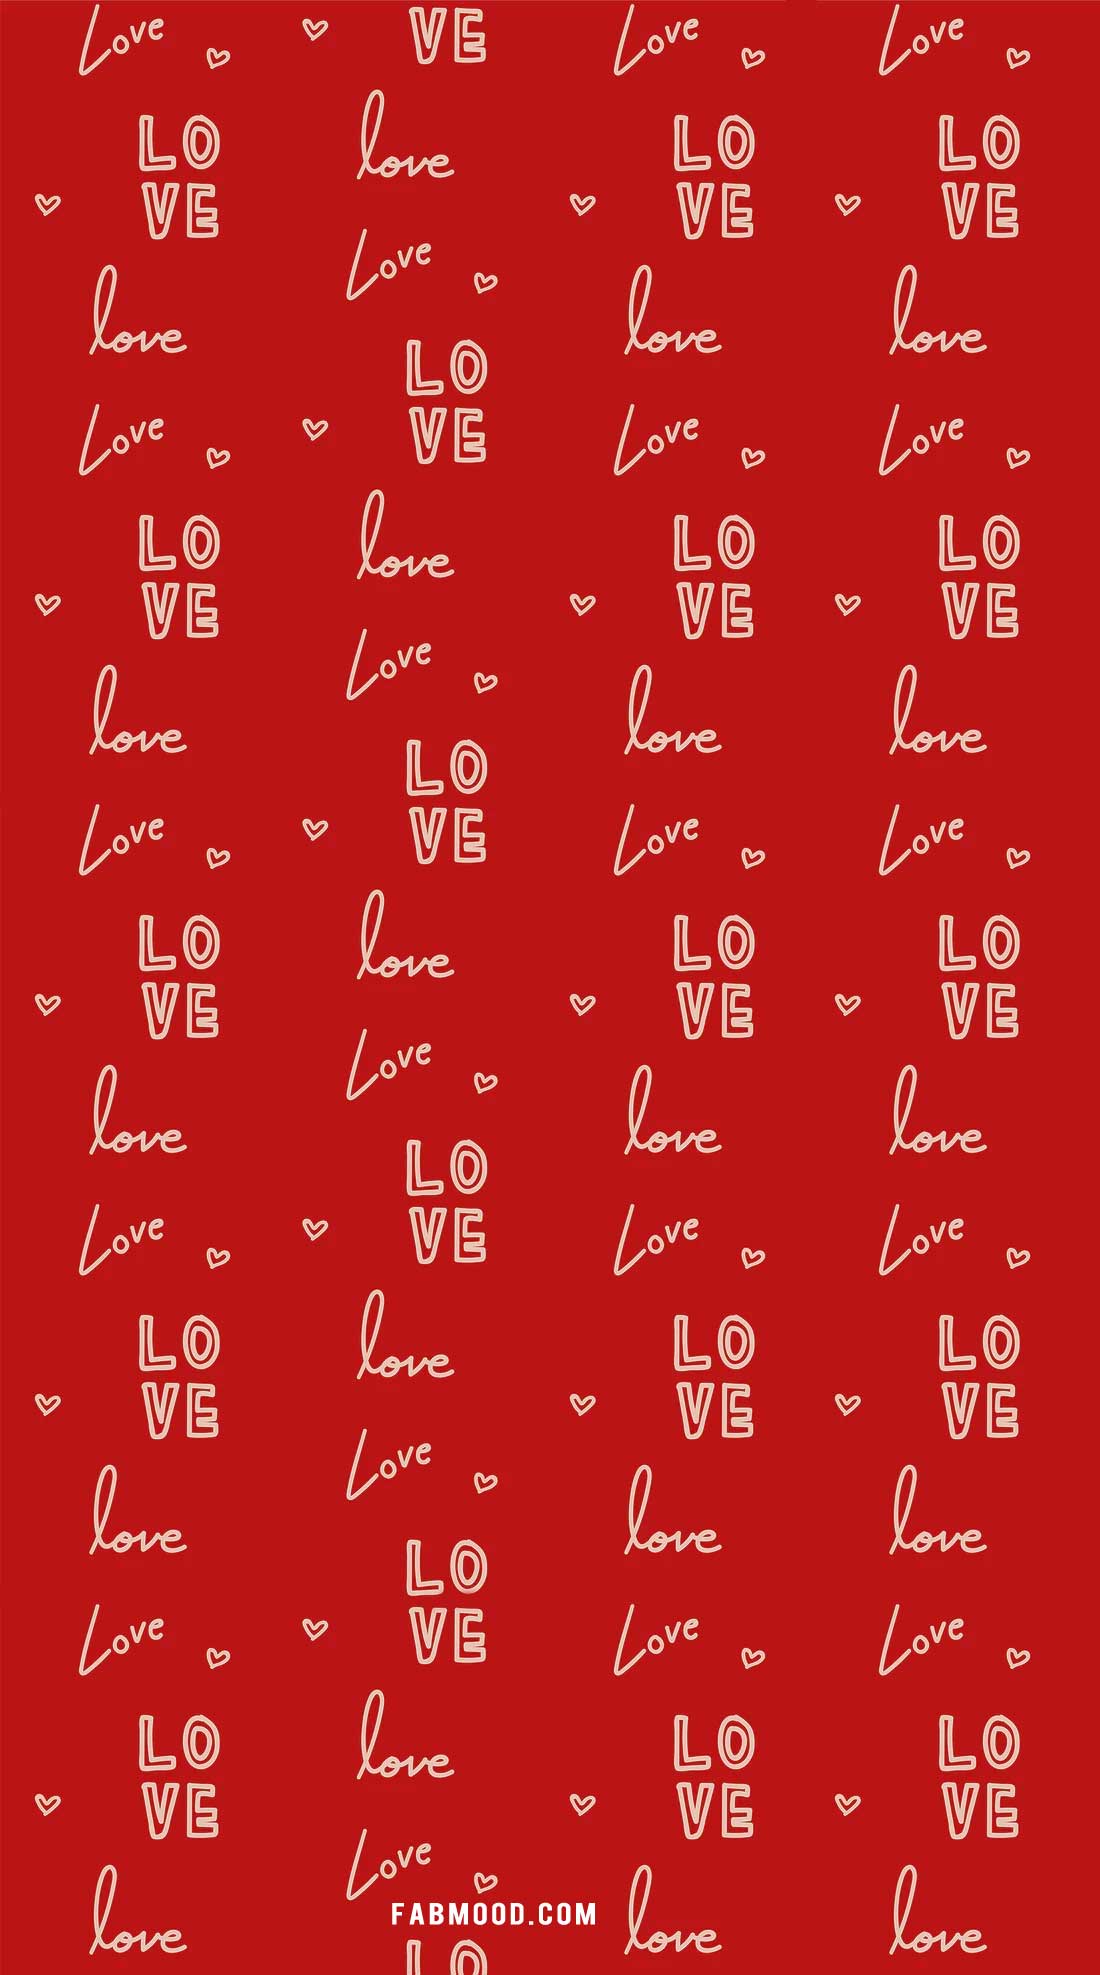 Red Valentine's Day Wallpaper 1 - Fab Mood